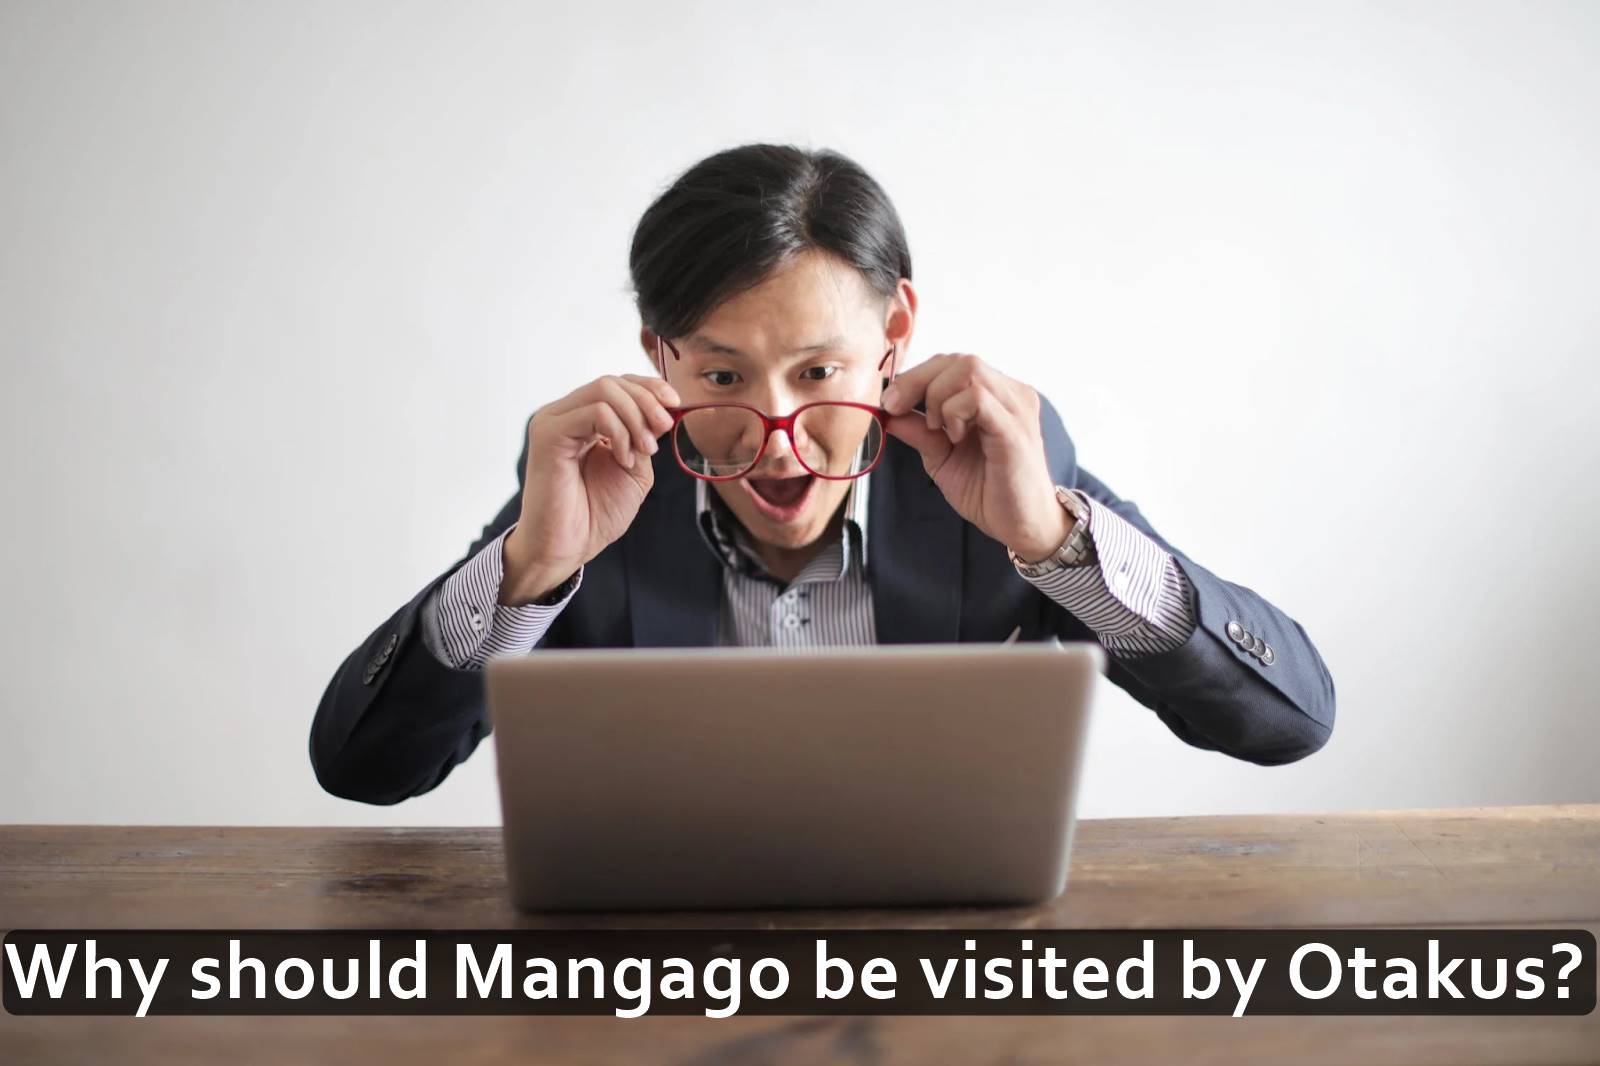 Why should Mangago be visited by Otakus